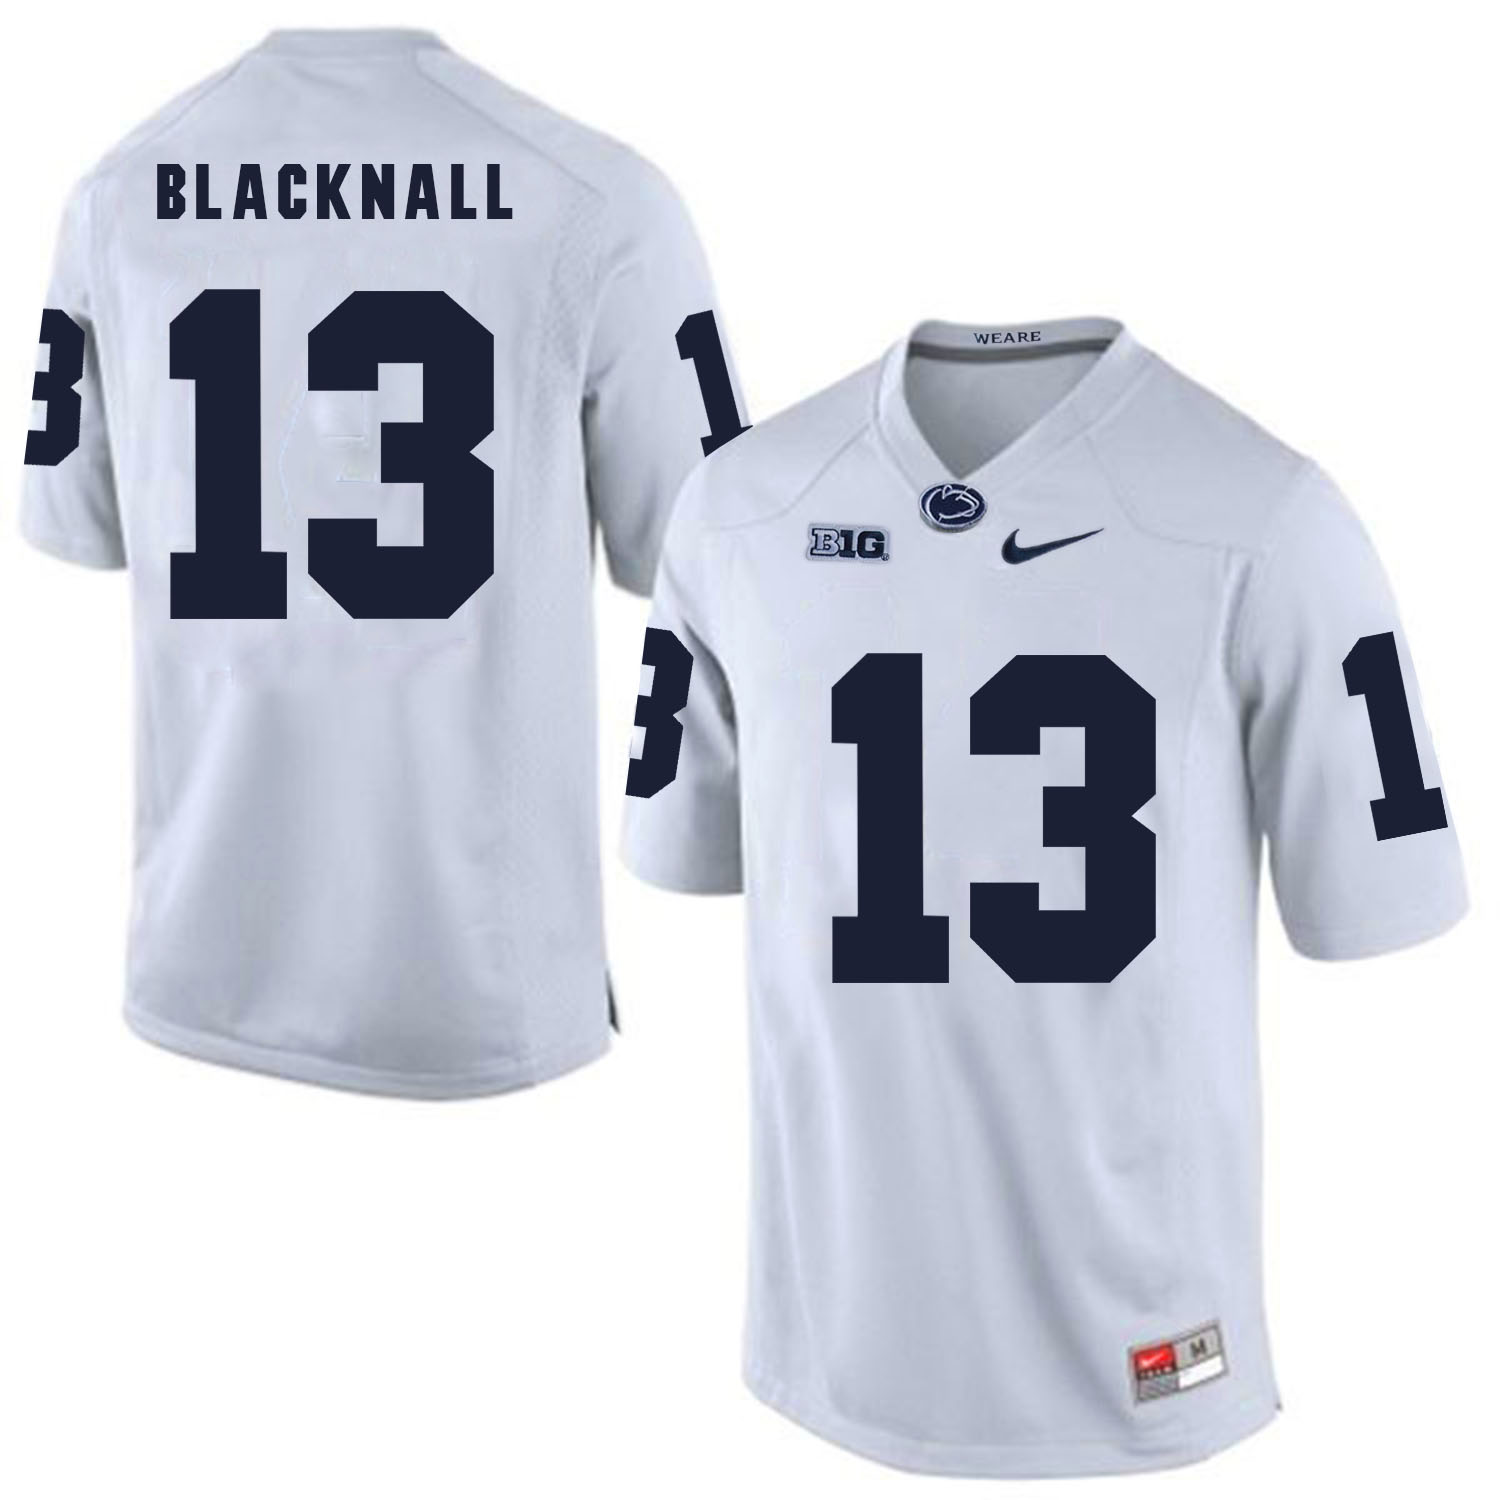 Penn State Nittany Lions 13 Saeed Blacknall White College Football Jersey